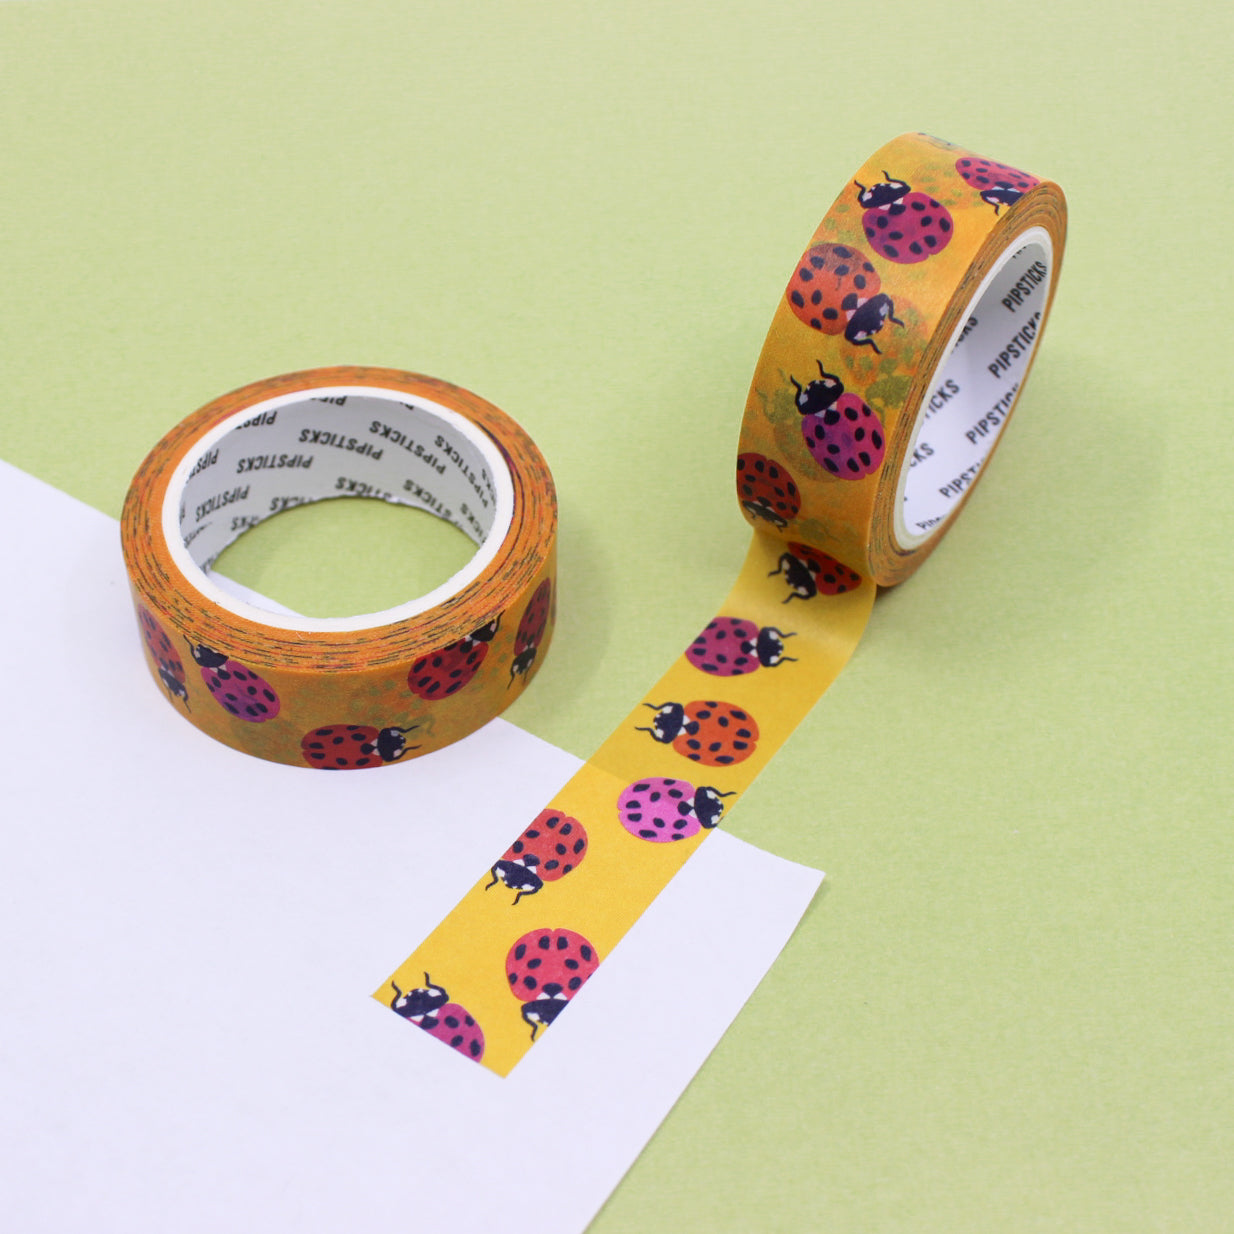 Adorable Lady Bugs Washi Tape: Features cute ladybugs, ideal for adding a playful and charming touch to your planners, journals, and crafts. This tape is from Pipsticks and sold at BBB Supplies Craft Shop.